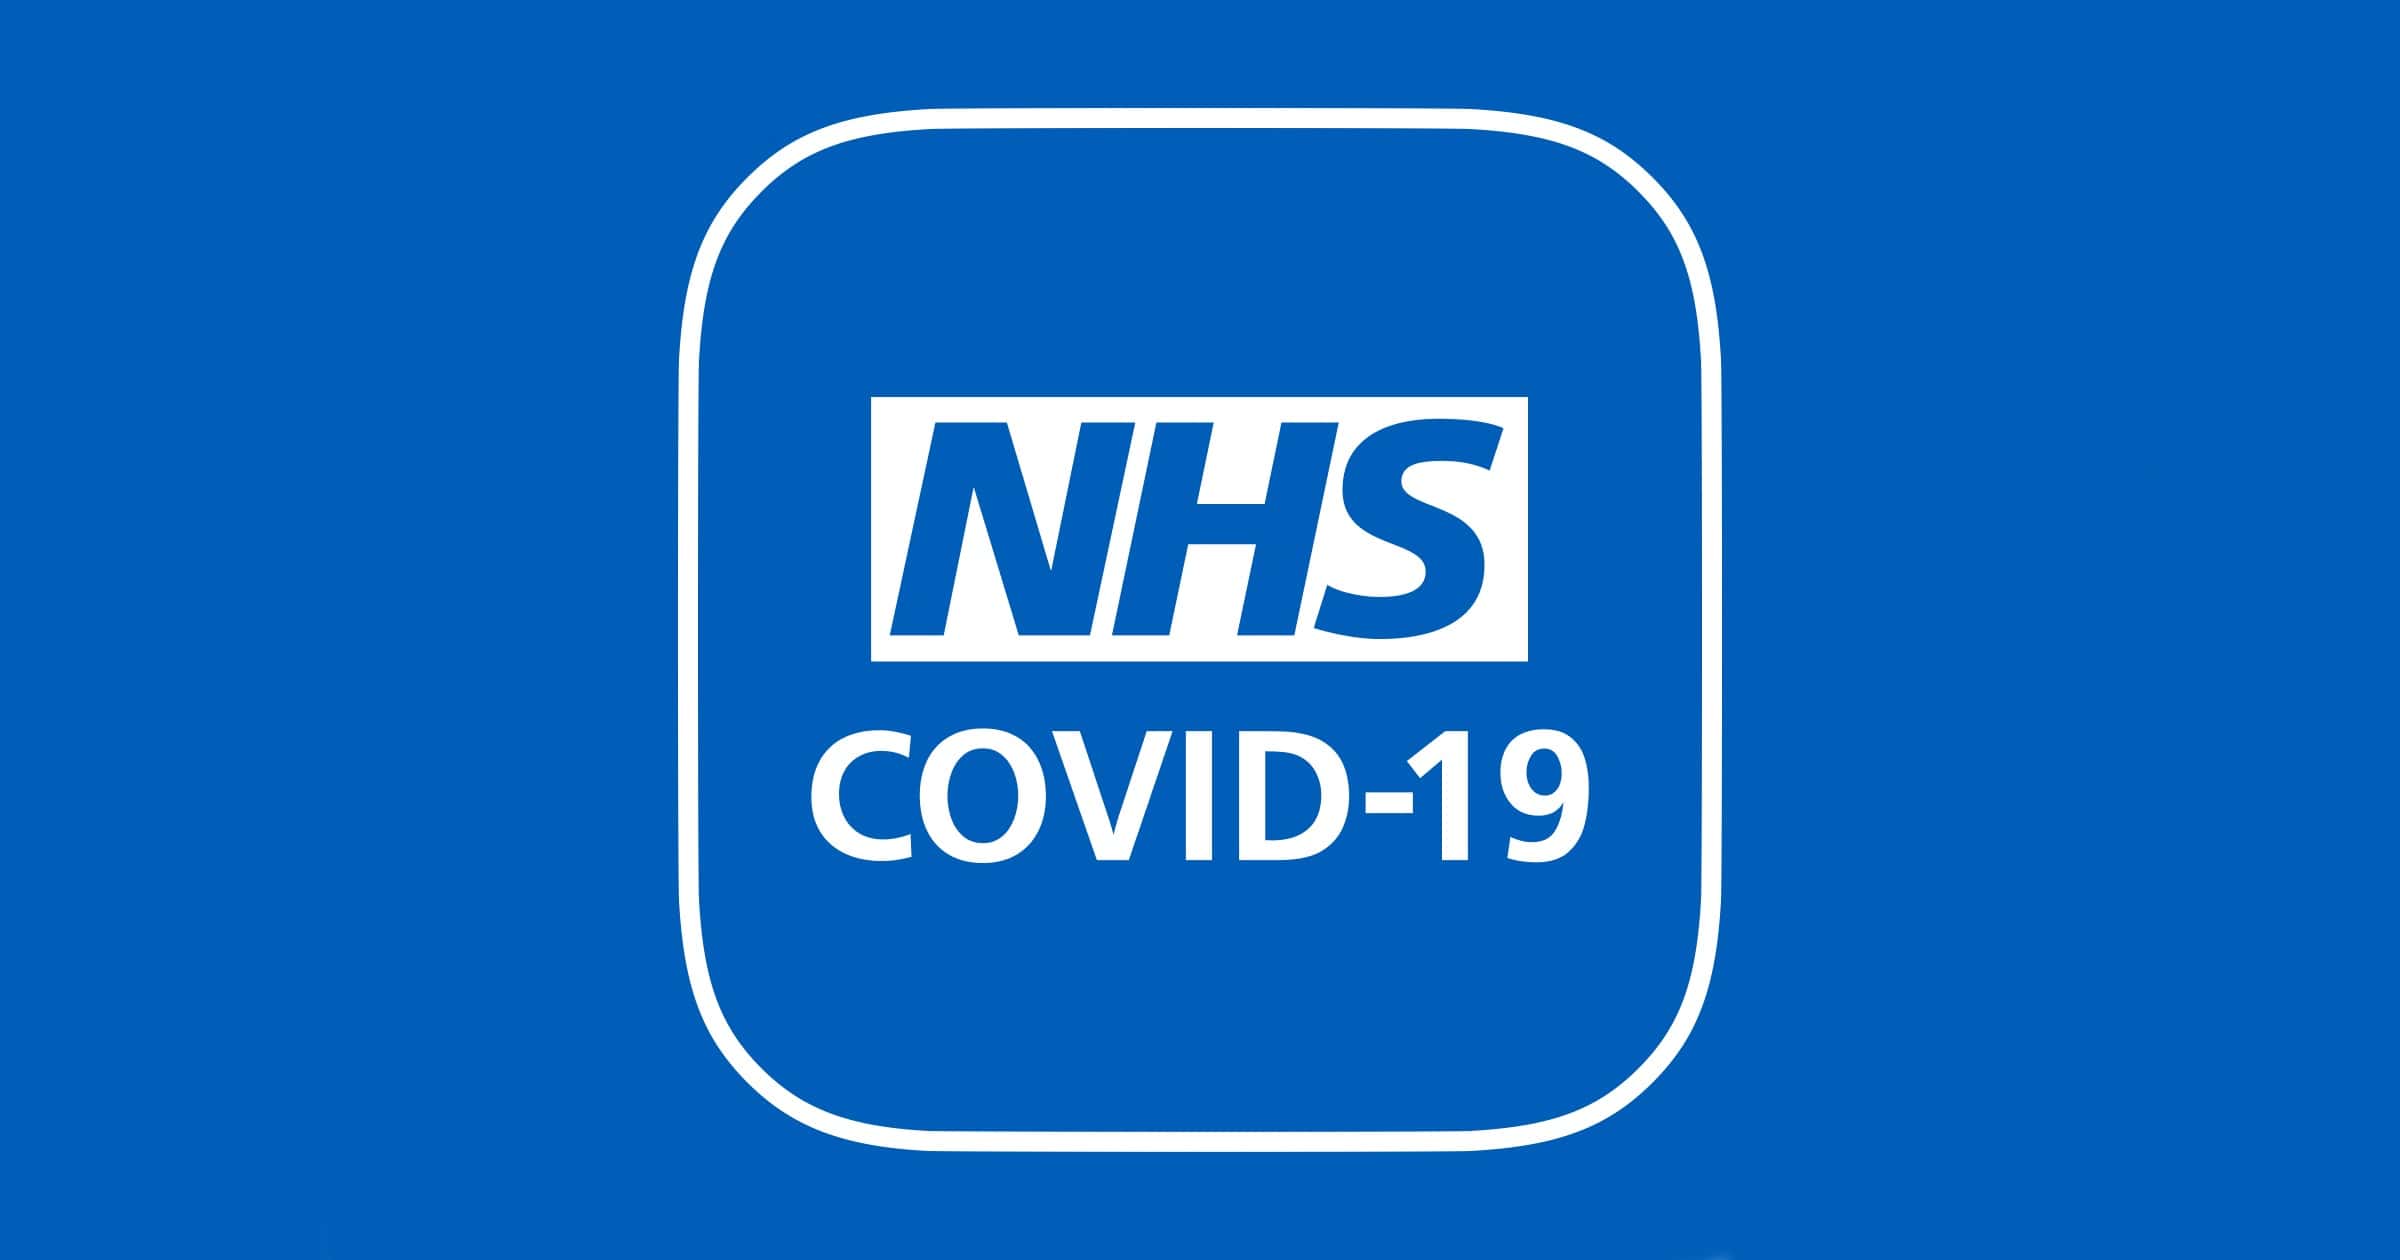 Some COVID-19 App Users in the UK are Getting Alerts from Apple, Not The NHS